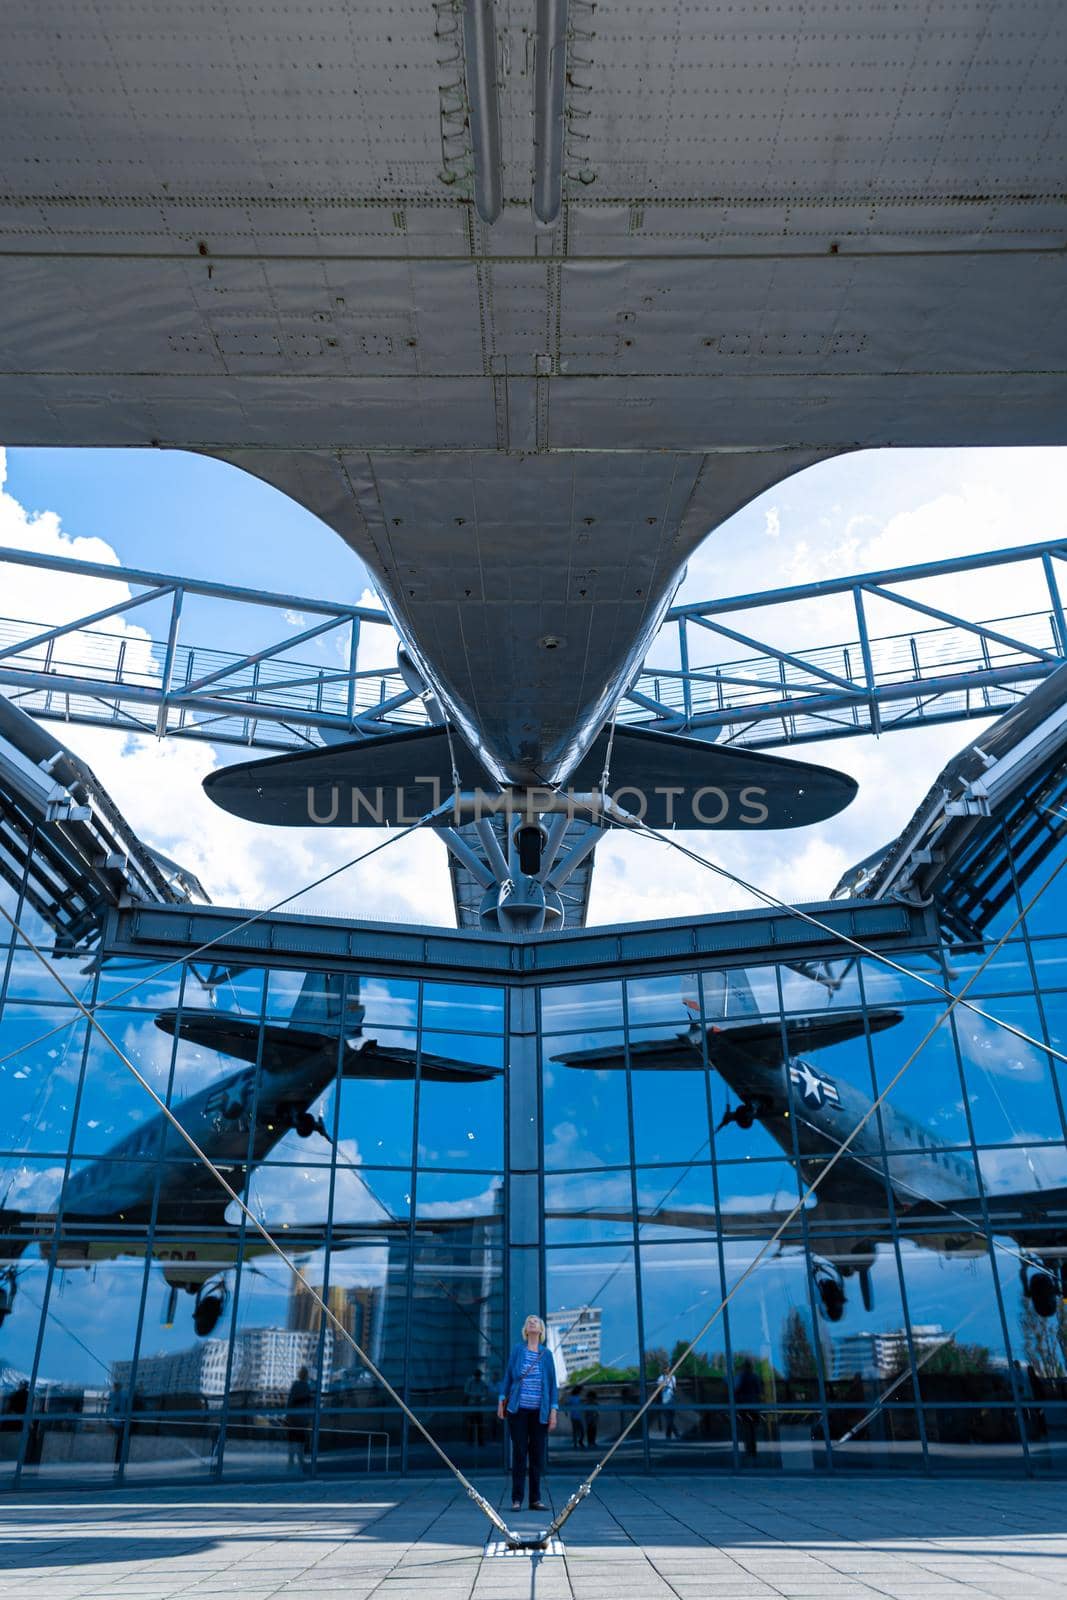 The plane is suspended from the facade of the building of the Aircraft Museum in Berlin. Berlin, Germany - 05.17.2019